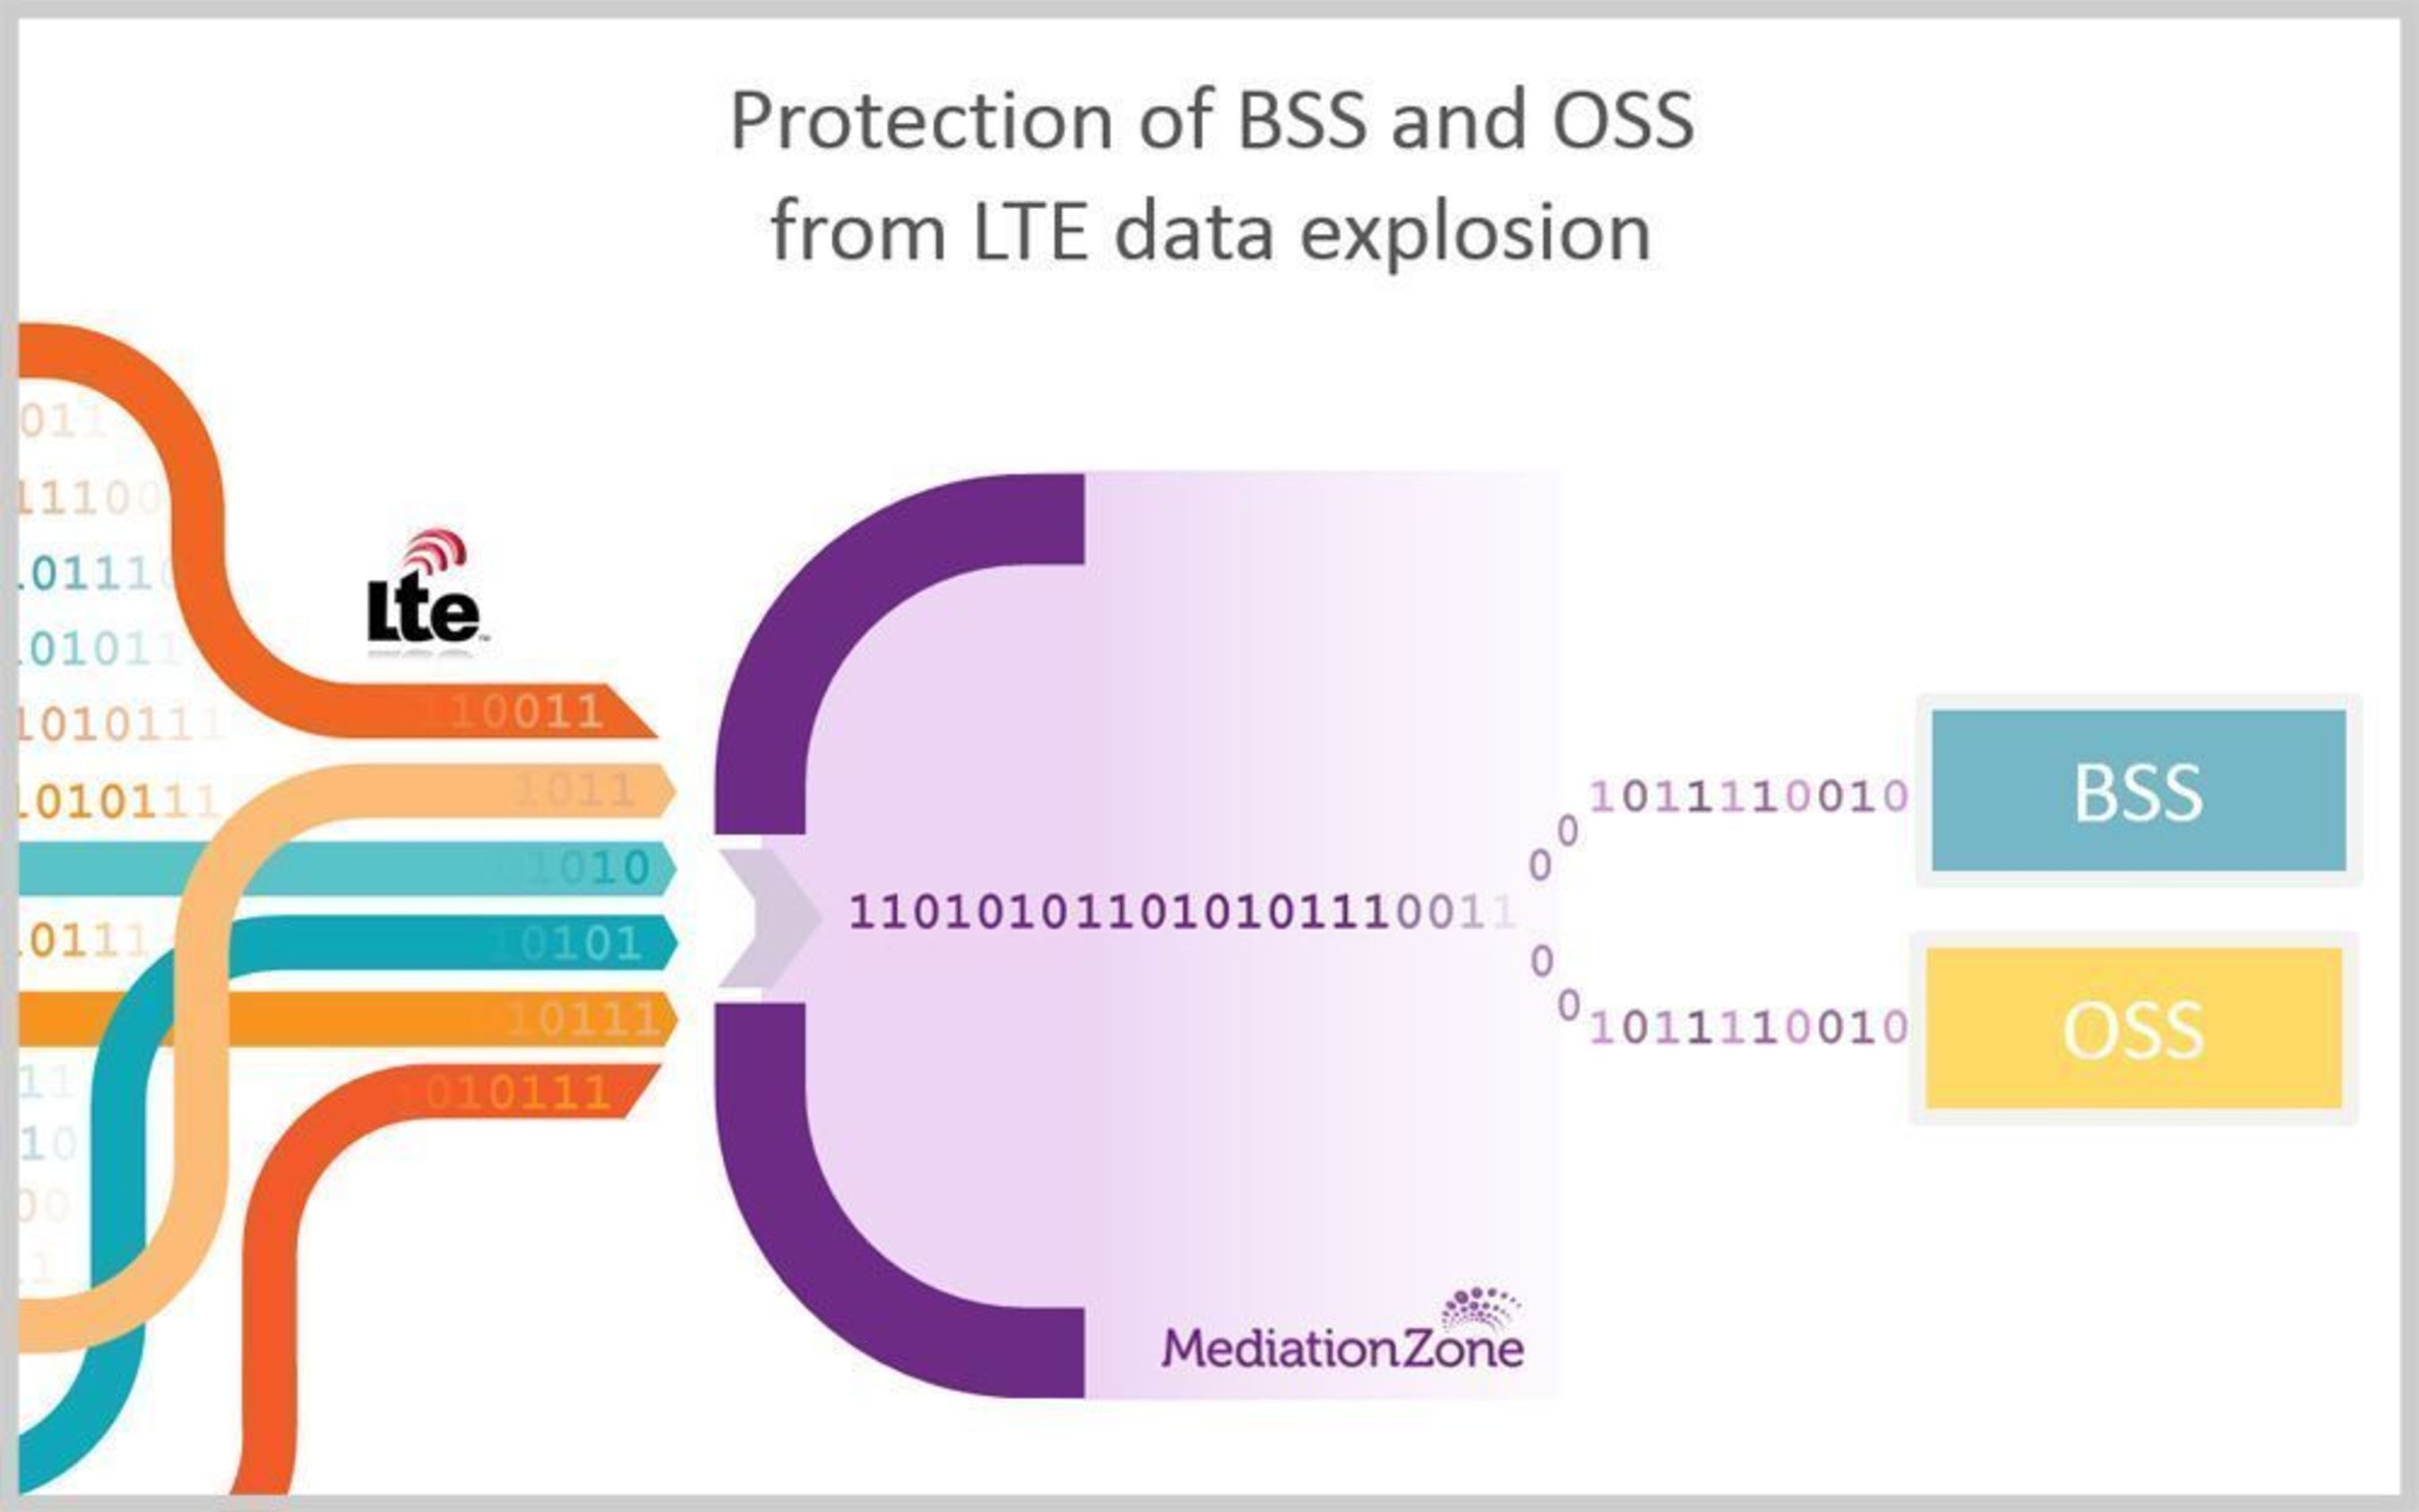 Protection of BSS and OSS from LTE data explosion. (PRNewsFoto/DigitalRoute AB)